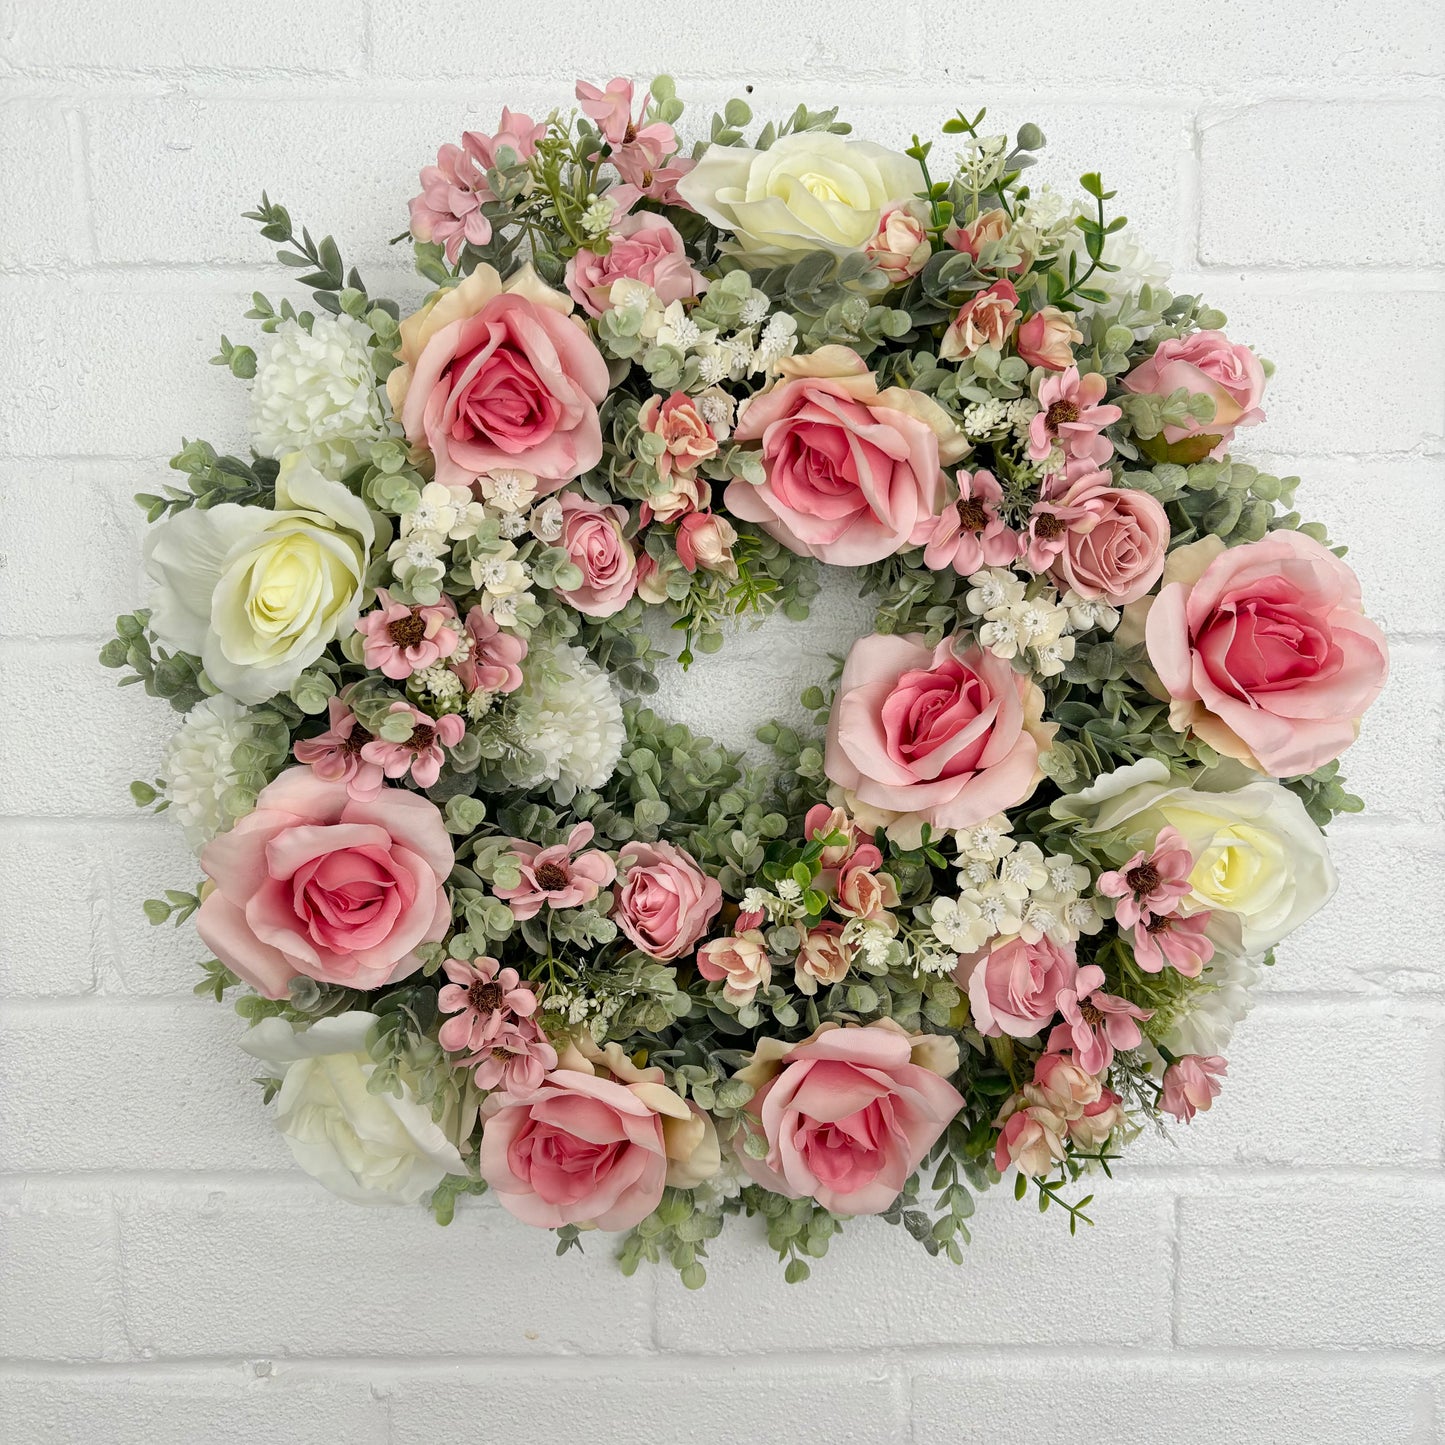 Artificial flower wreath, pink and cream roses, ivory flowers, artificial wedding flowers, door wreath, flower wreathe